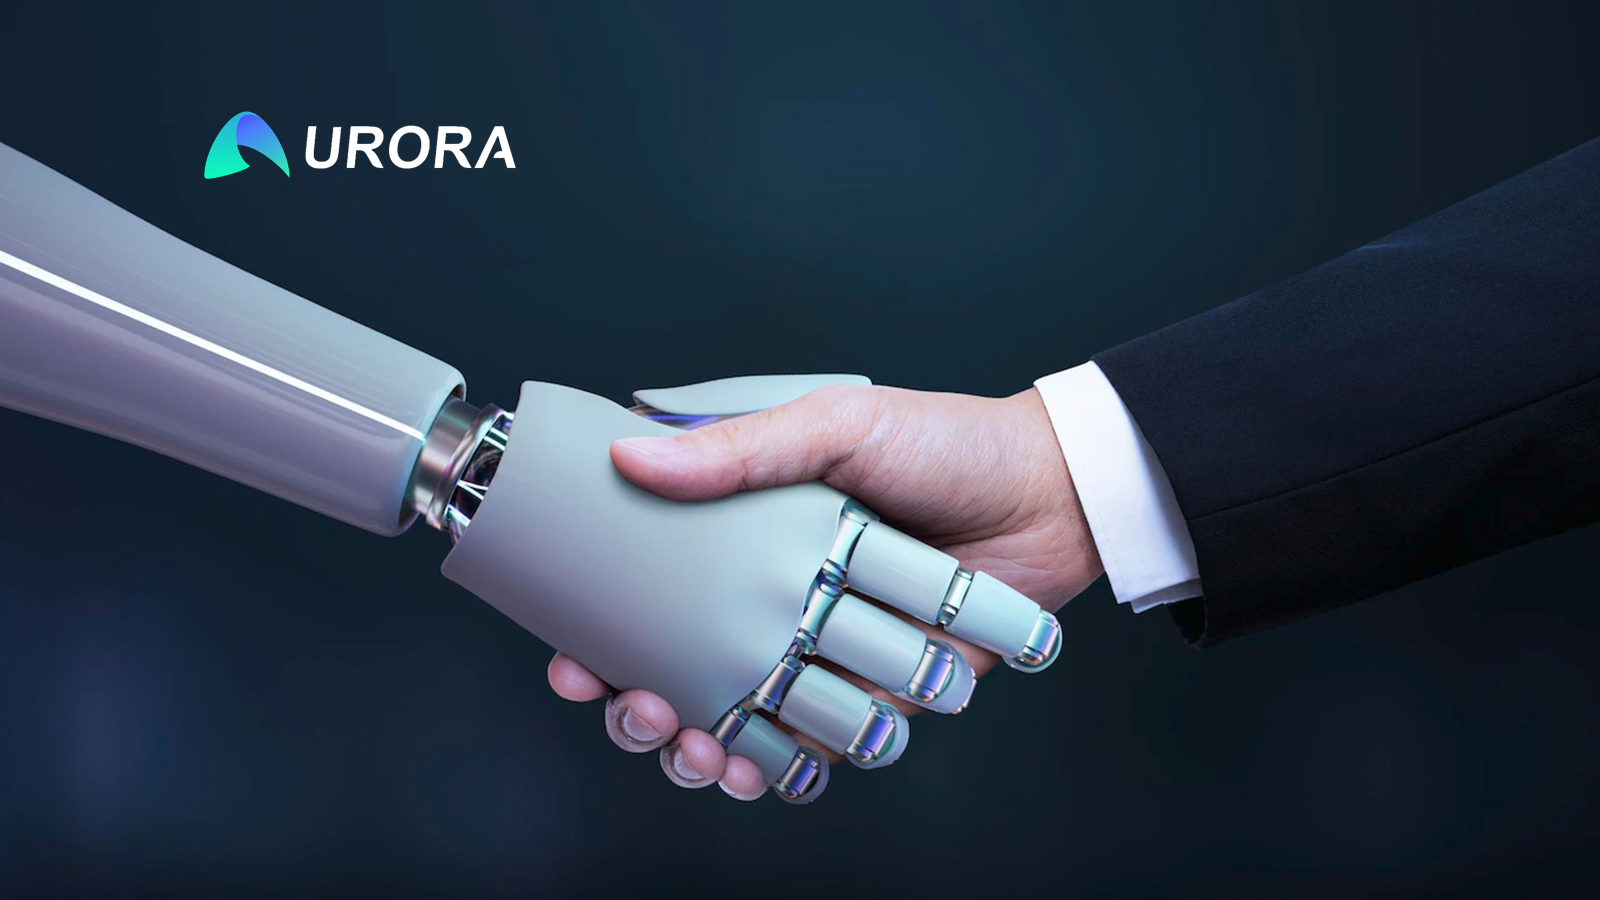 Aurora Mobile Partners with Baidu ERNIE Bot to Develop a Full Range of AI-Driven Interactive Marketing Products